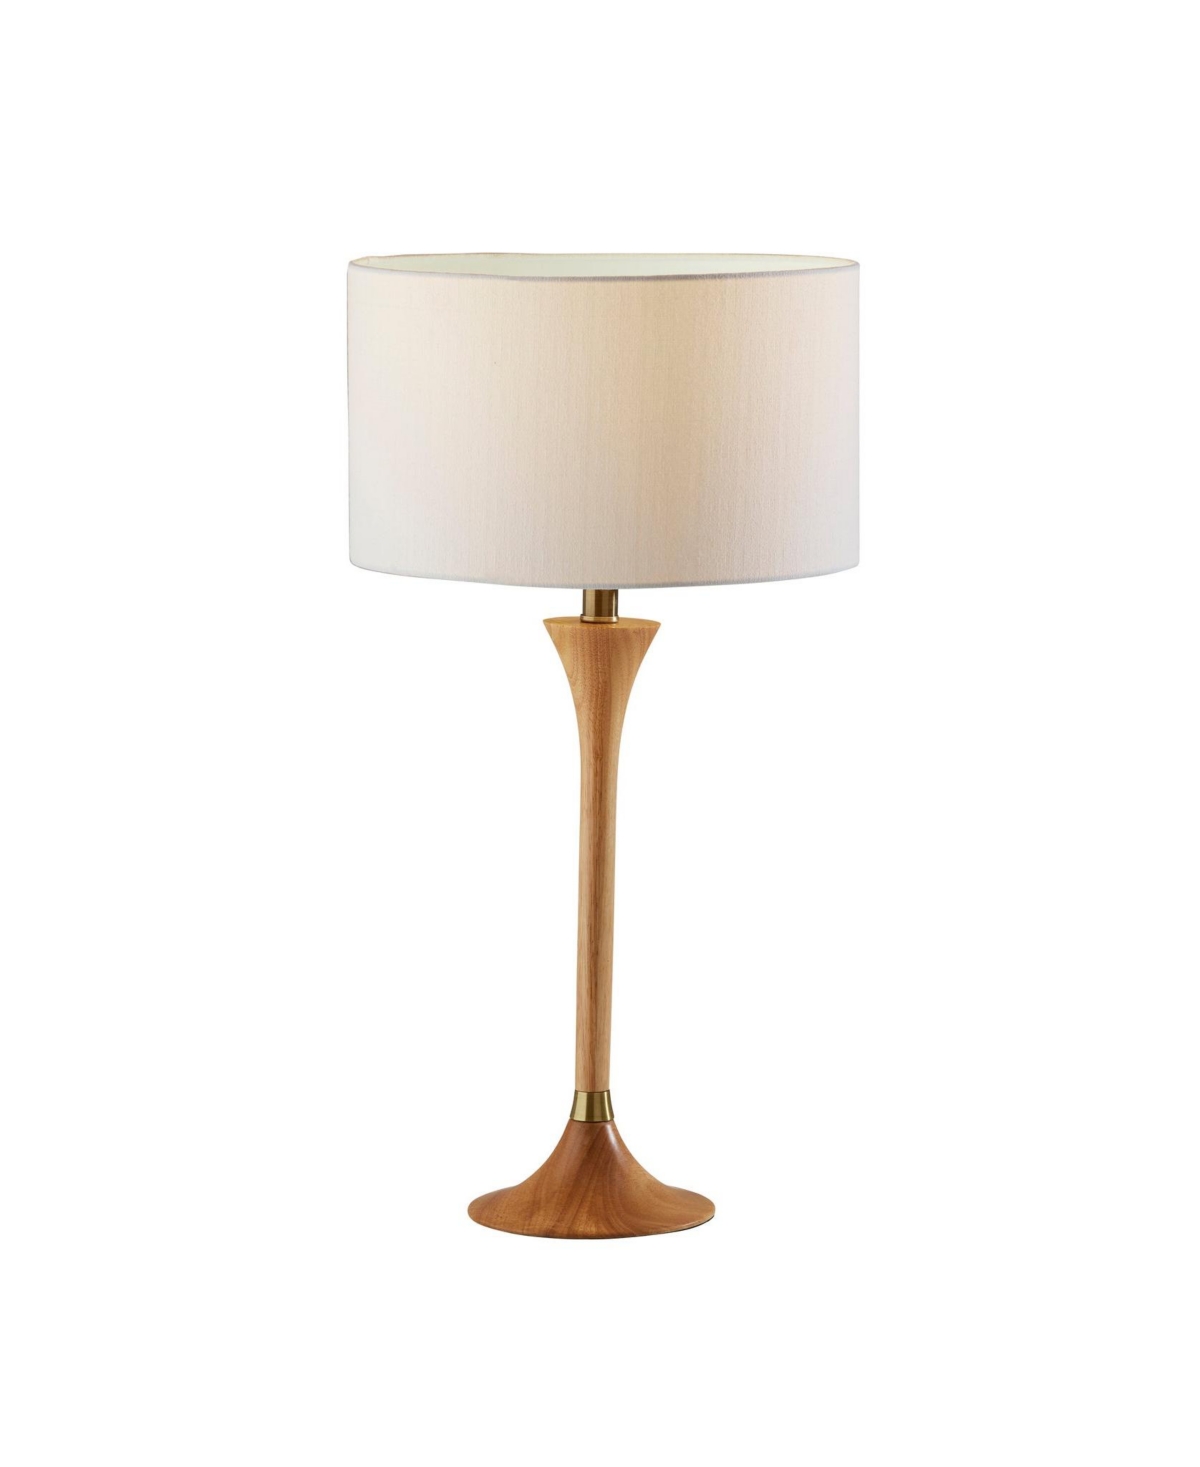 Adesso Rebecca Table Lamp In Natural Rubberwood With Antique-like Bra